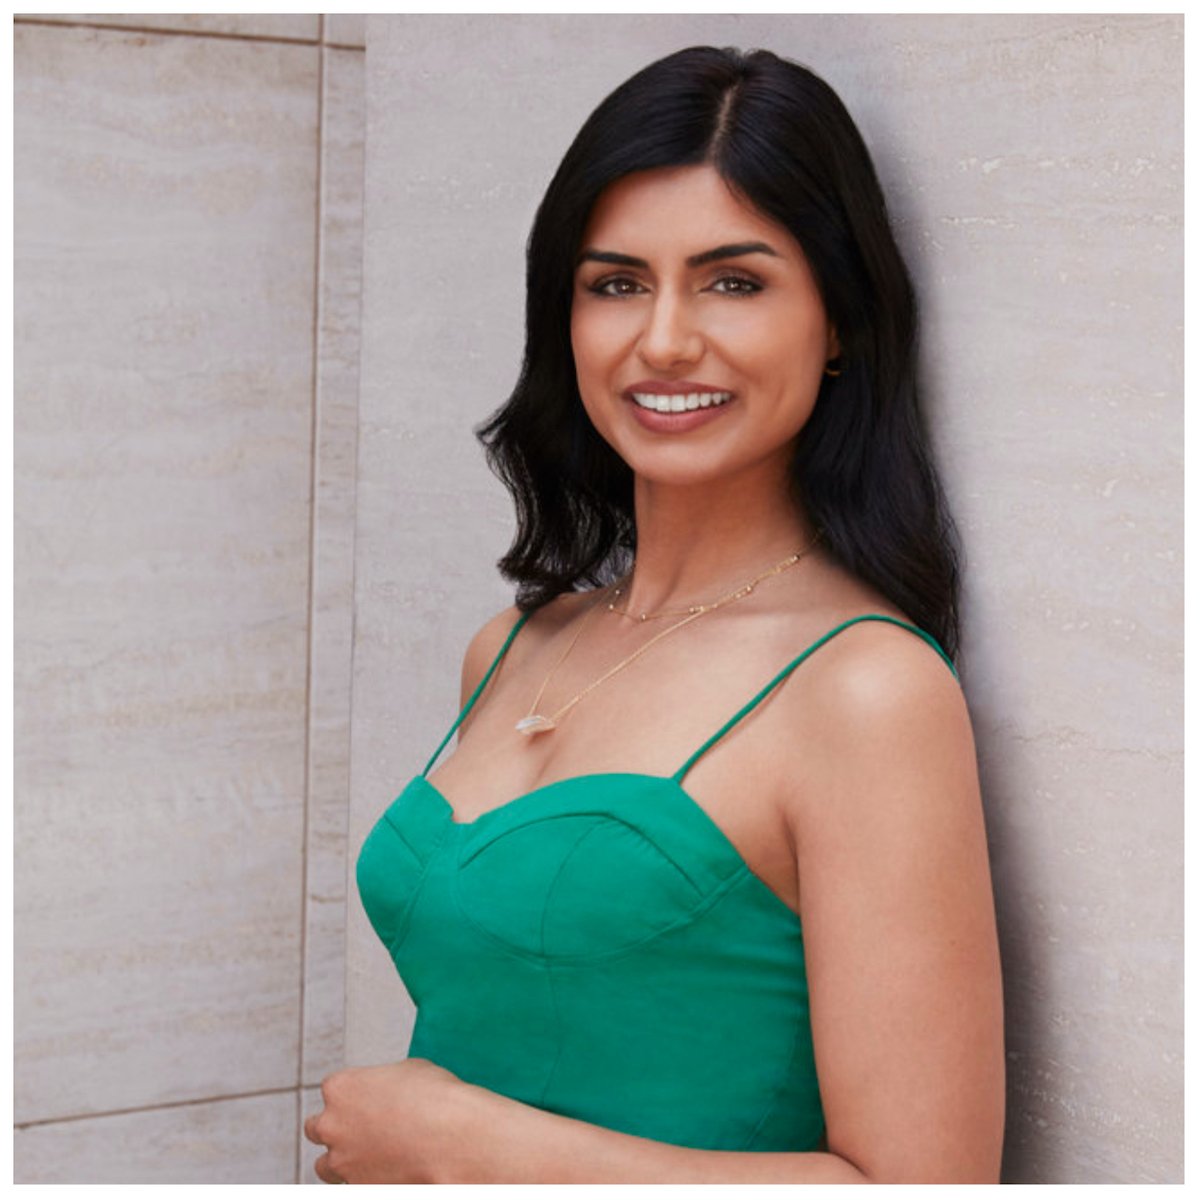 Gurleen Virk from Bravo's 'Love Without Borders' cast photo